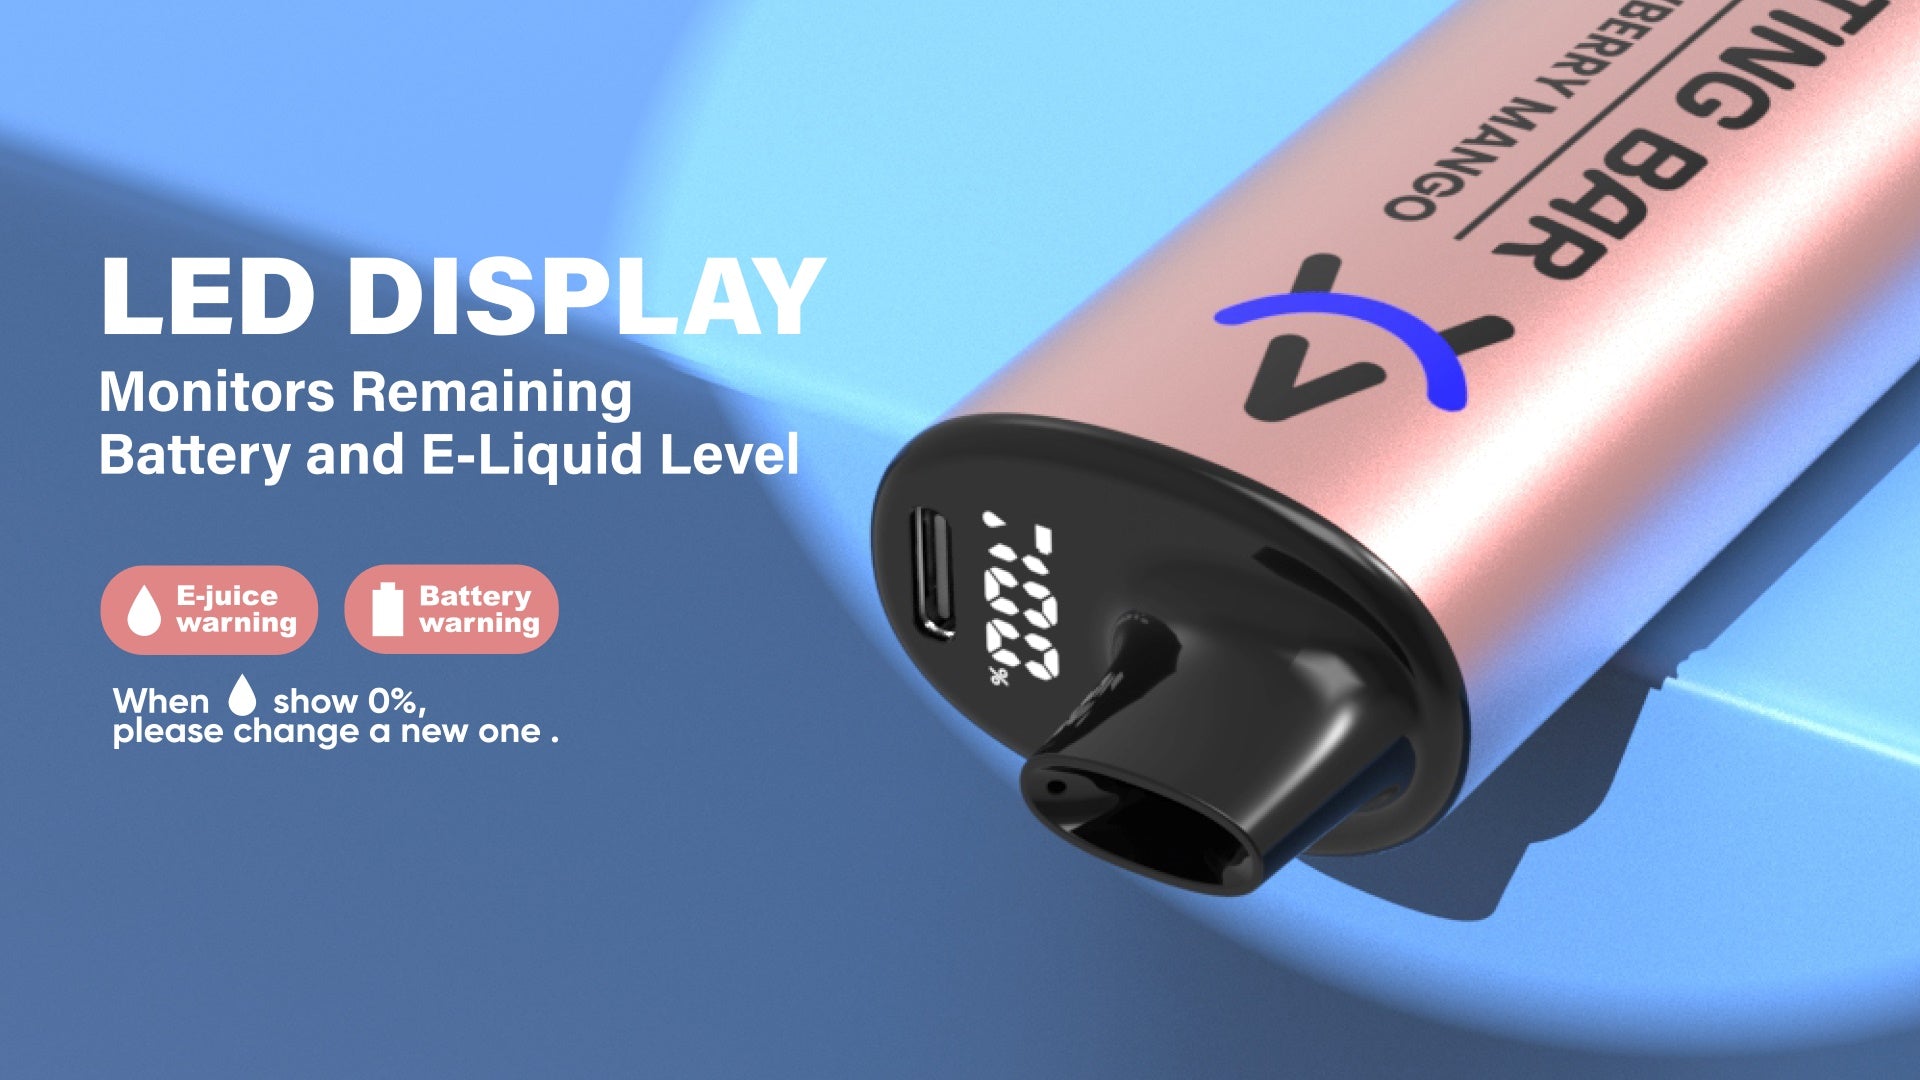 Features-Of-DB70-LED-Display-Battery-And-E-Liquid-Level